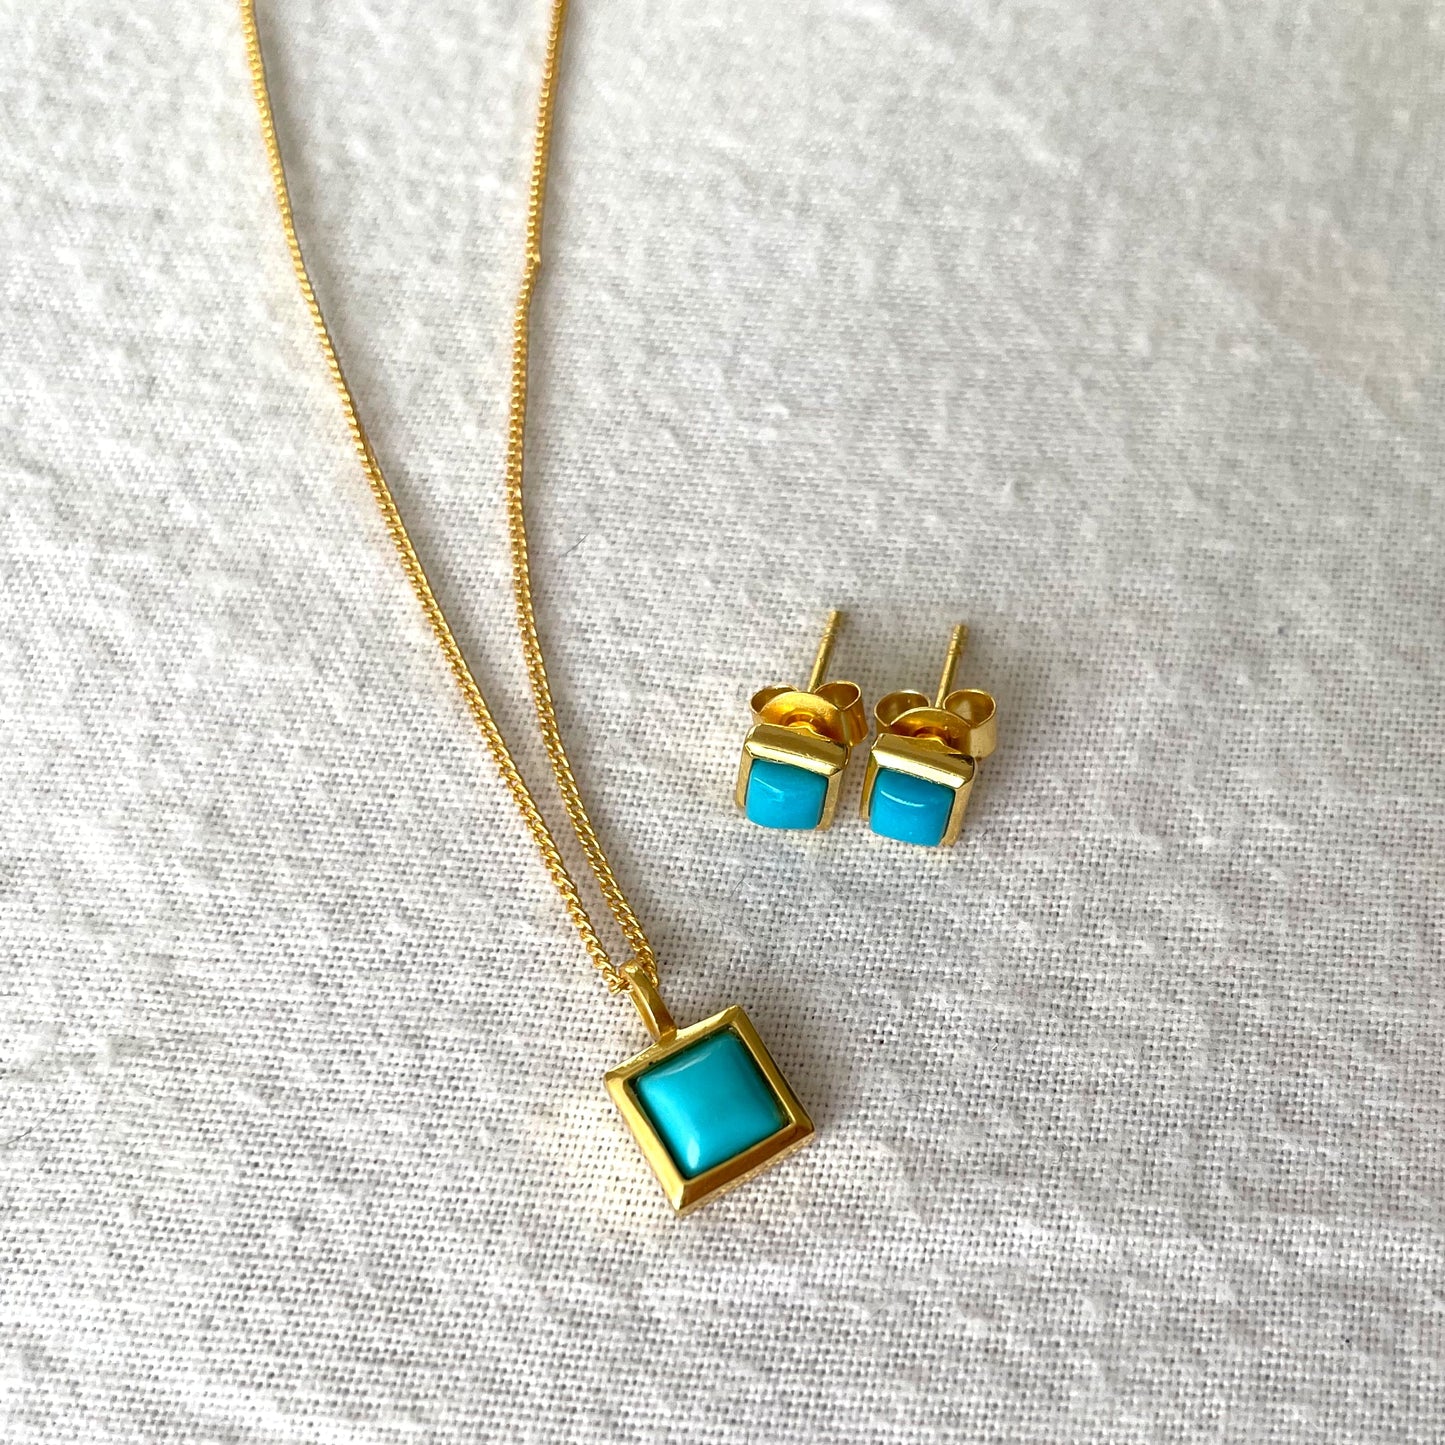 Turquoise Gold Necklace Gift set, Crystal gemstone necklace, Gold Plated on 925 Sterling Silver, handmade earrings, Turquoise necklace, Unique Gift, turquoise, gold studs, Crystal, Christmas gift ideas, small business, london, dainty necklace